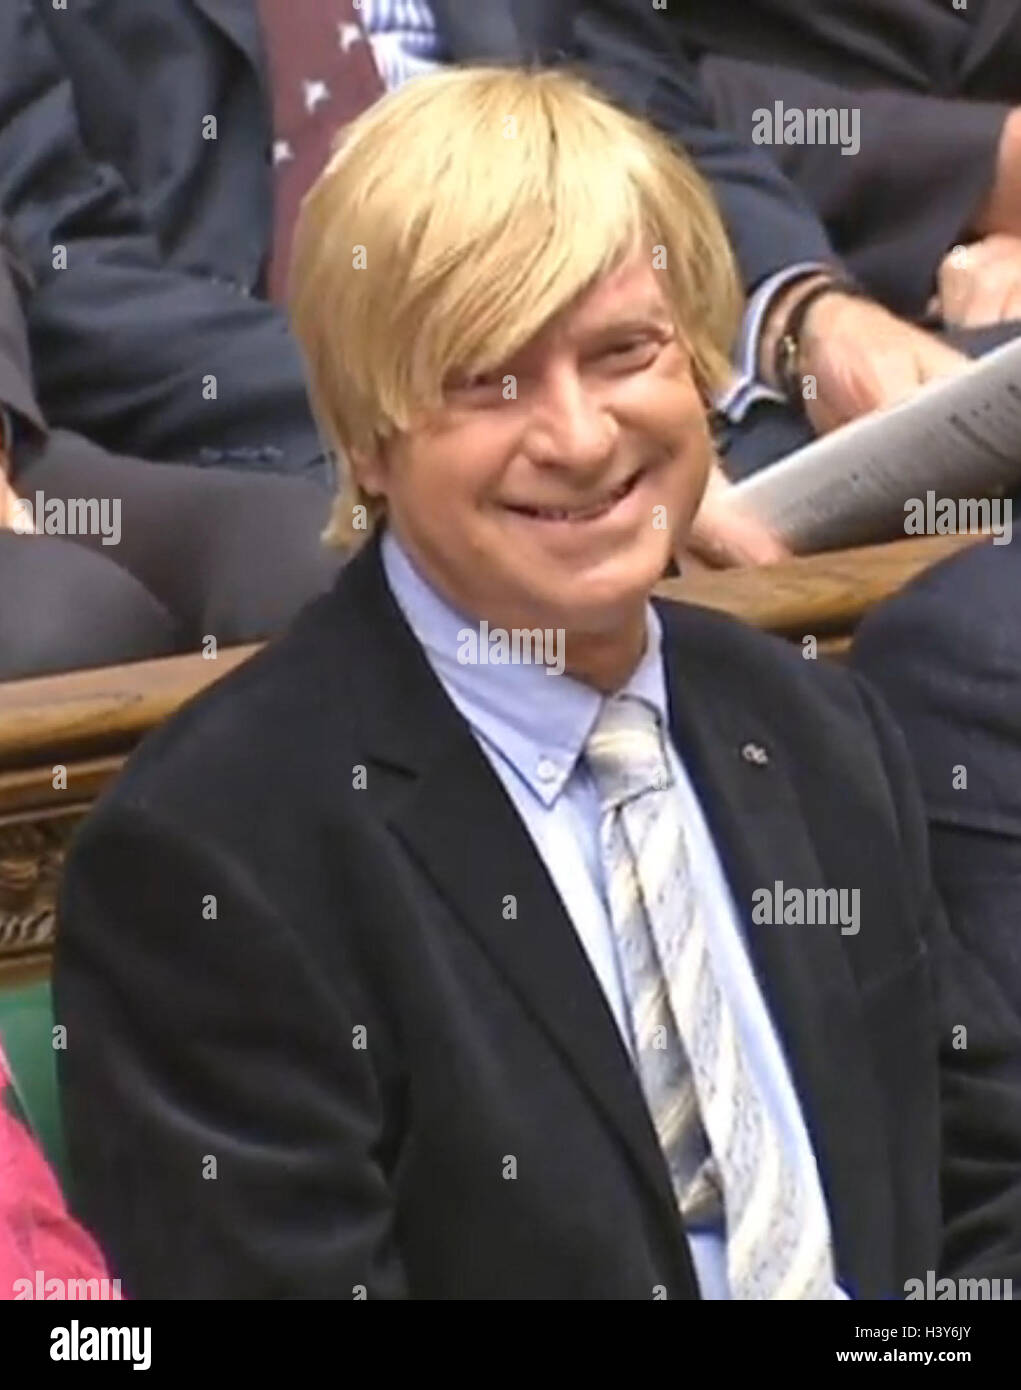 Conservative MP Michael Fabricant smiles during Prime Minister's Questions in the House of Commons, London, after he announced he has been successfully treated for prostate cancer. Stock Photo